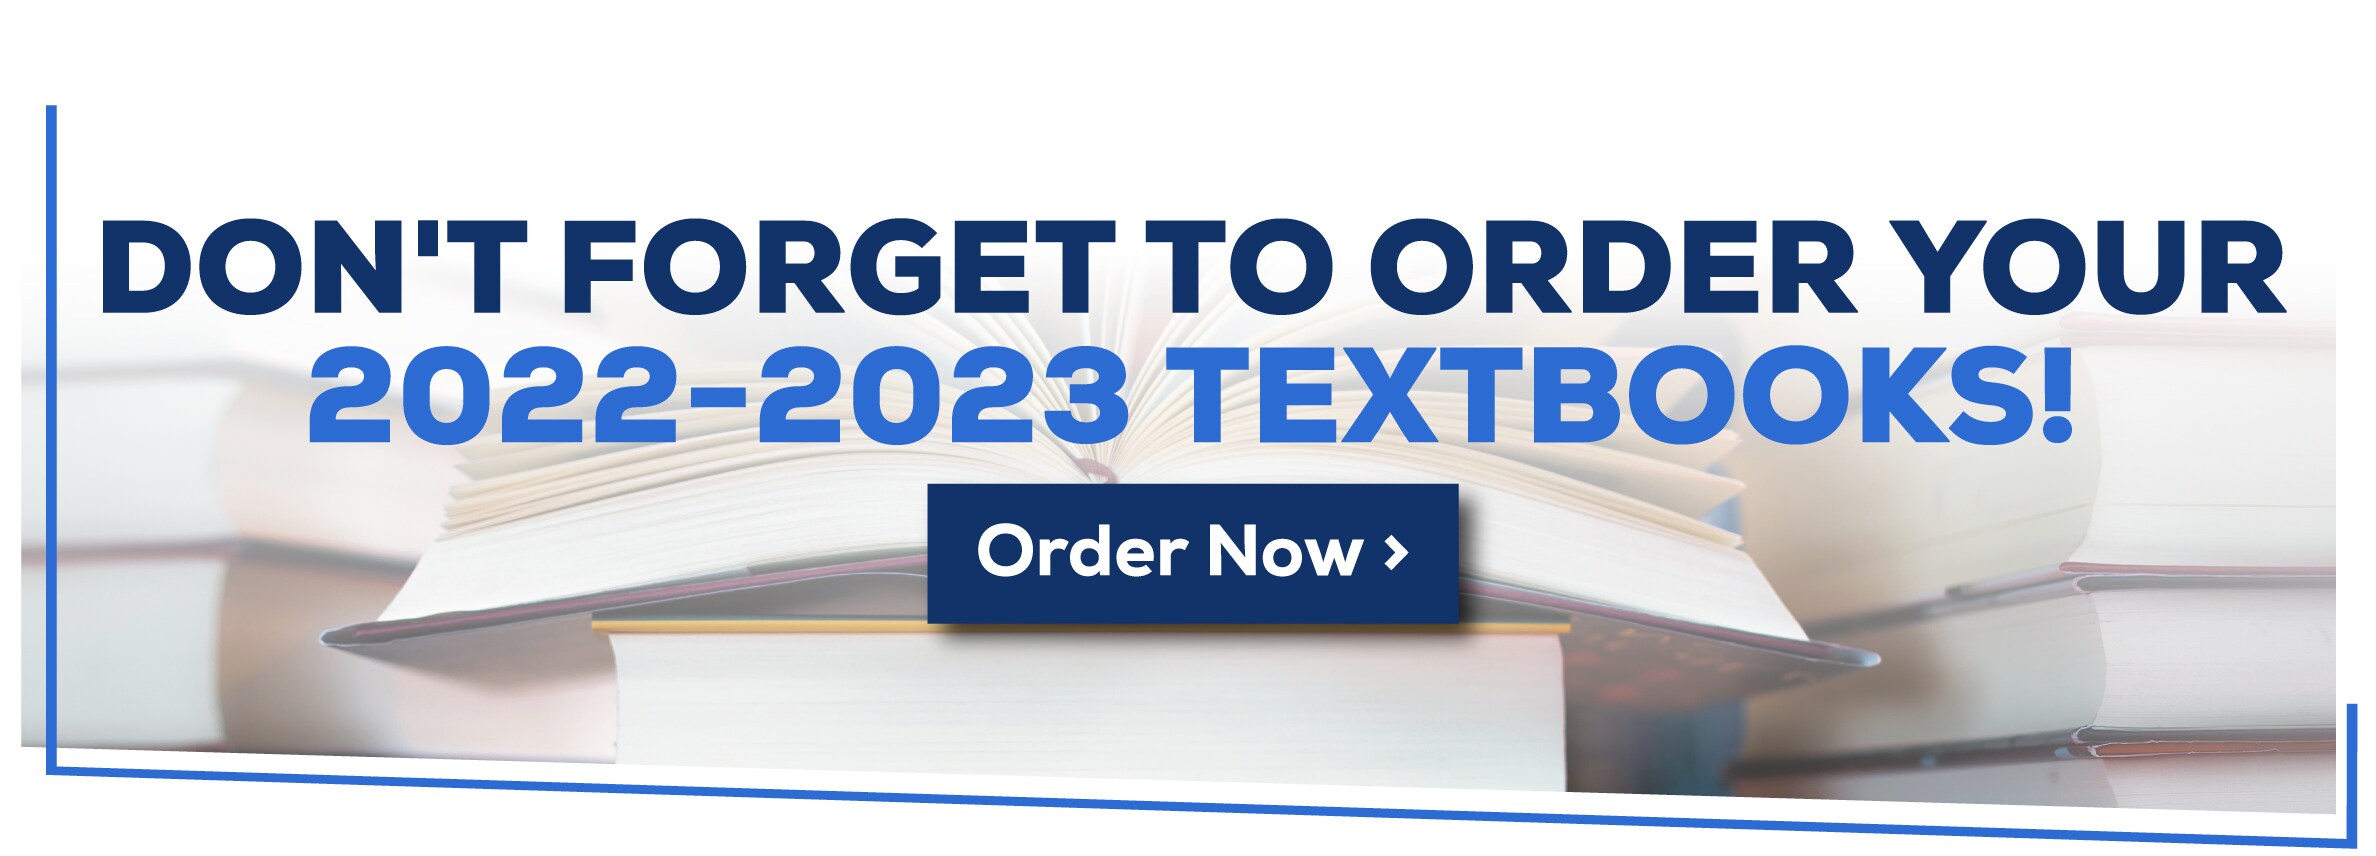 Don't forget to order your 2022-2023 textbooks! Order Now!